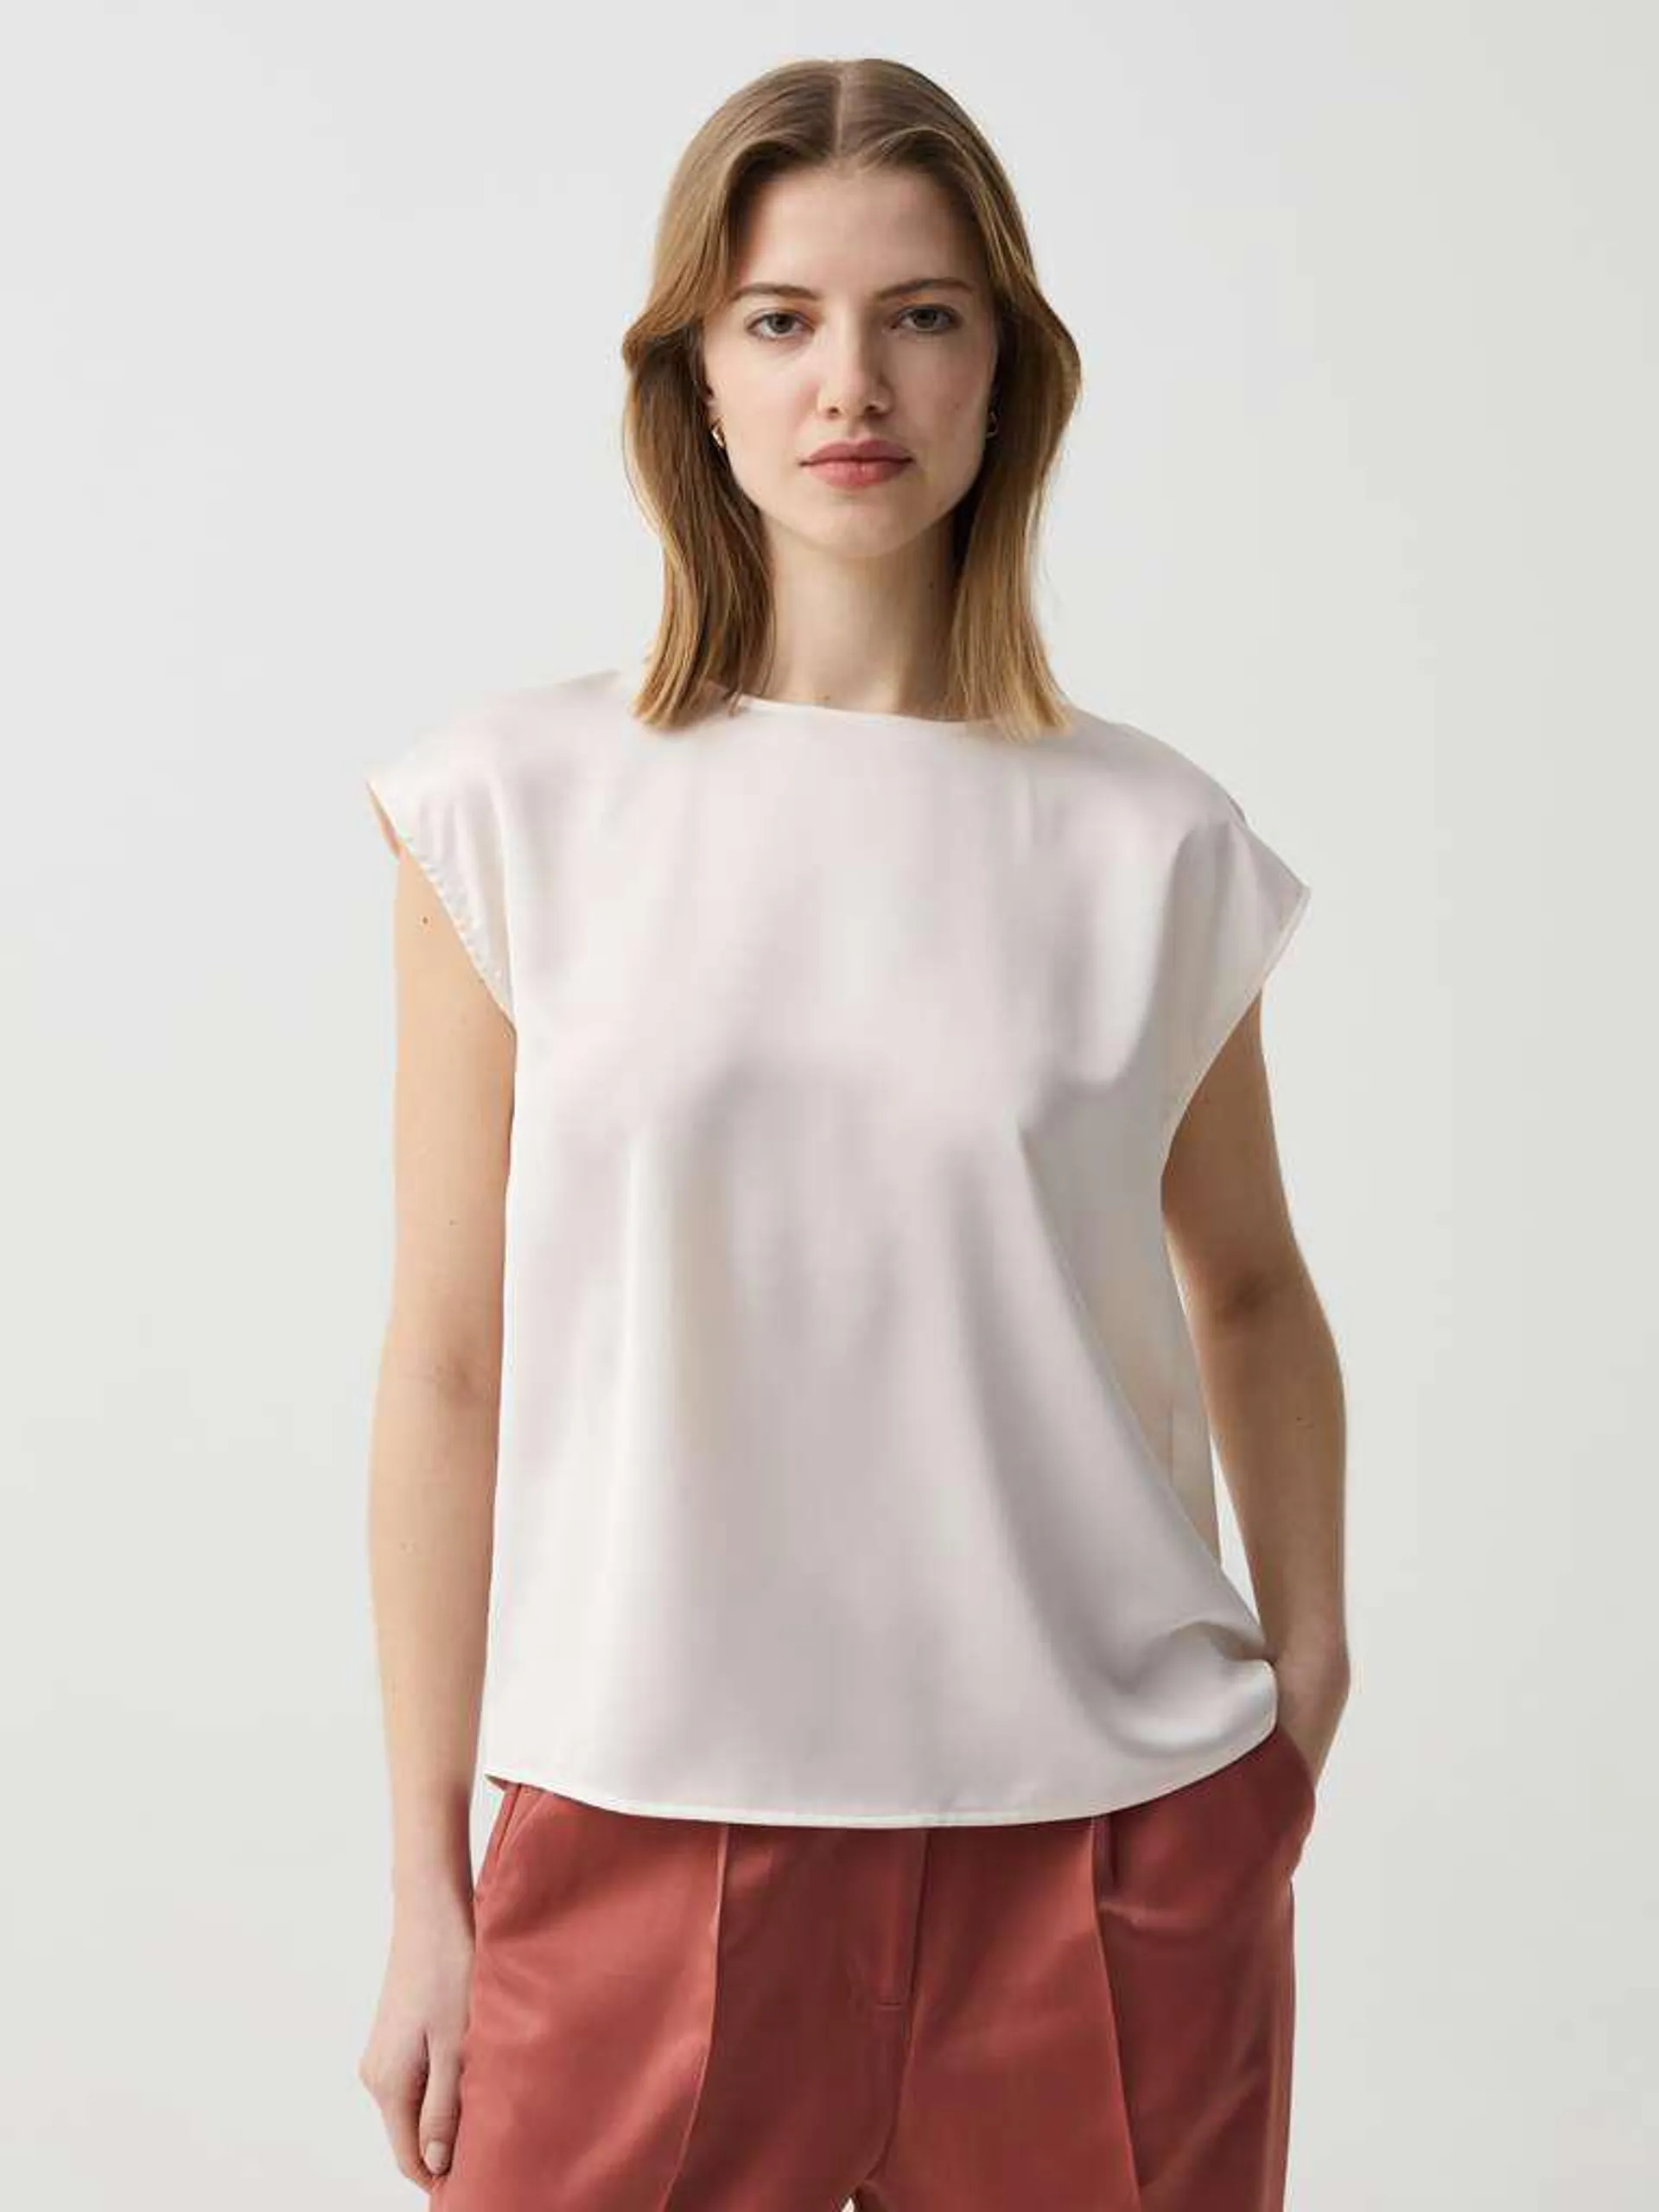 Milky White Satin blouse with short sleeves